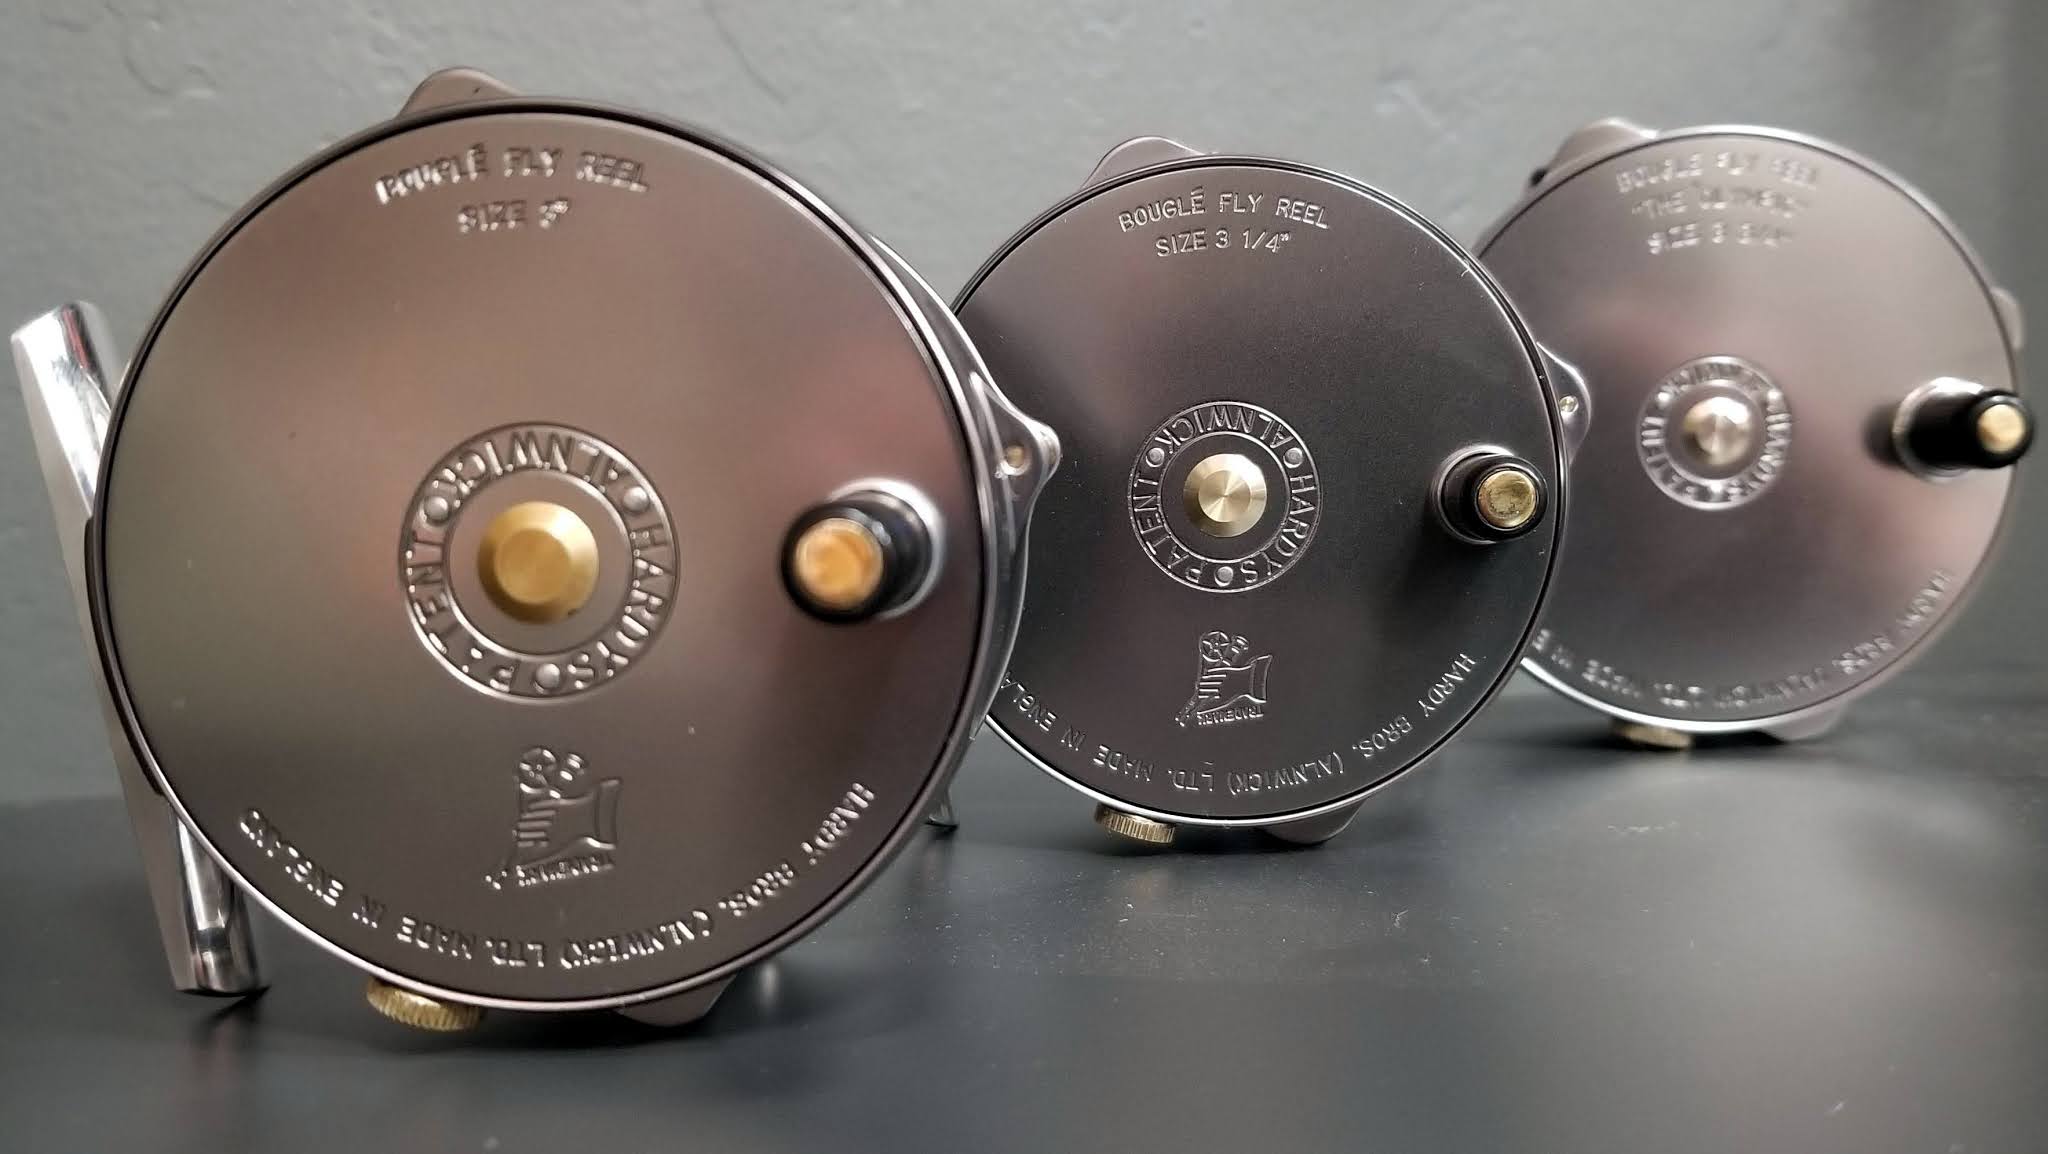 Gorge Fly Shop Blog: Hardy 1939 Bougle Heritage Fly Reels - Limited Edition